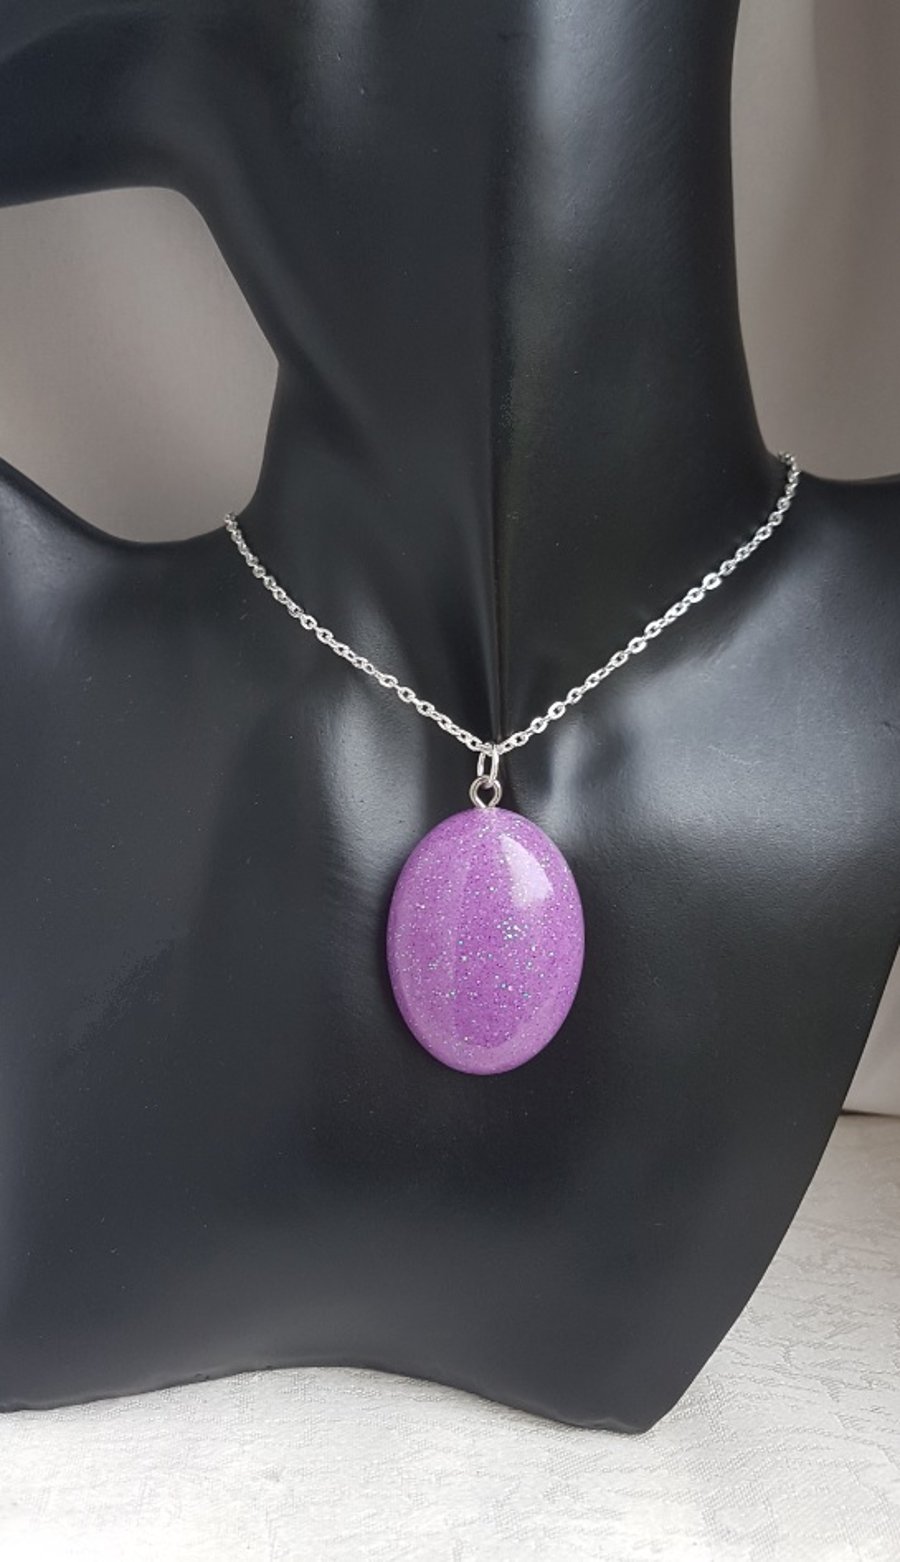 Gorgeous Glittery Lilac Oval Resin Pendant on Chain - Silver Tones